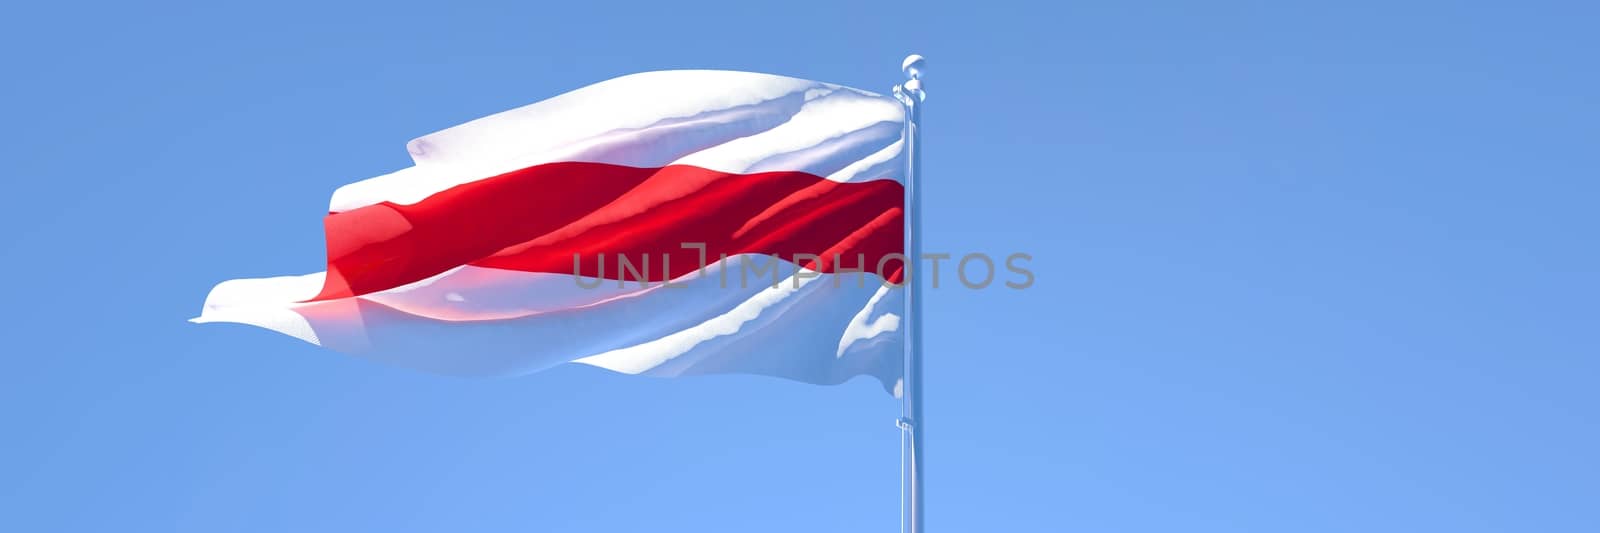 3D rendering of the national flag of Belarus waving in the wind against a blue sky